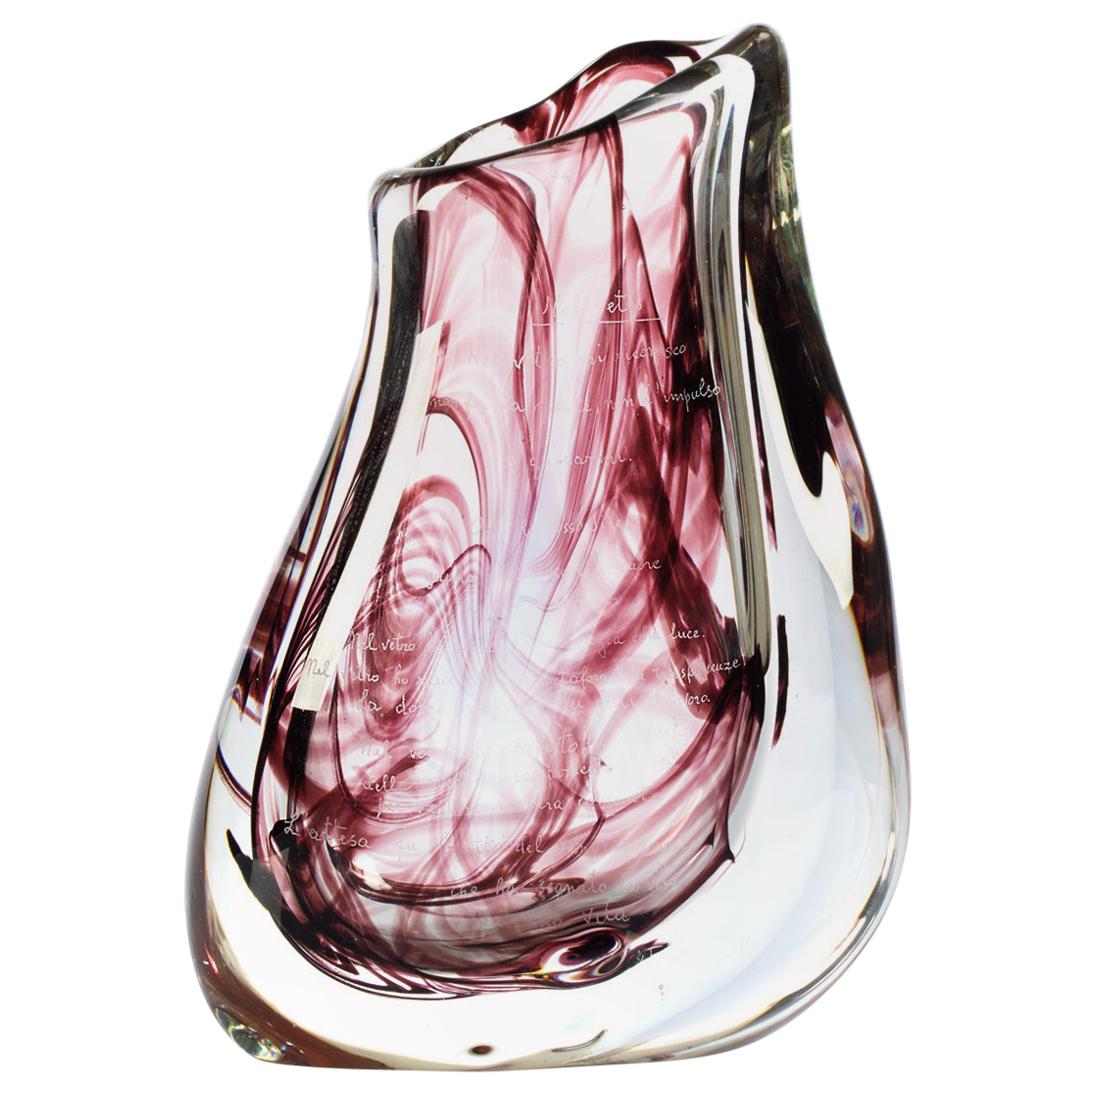 Giampaolo Seguso, "Through Glass" Vase, One of a Kind Murano Glass Art Works For Sale